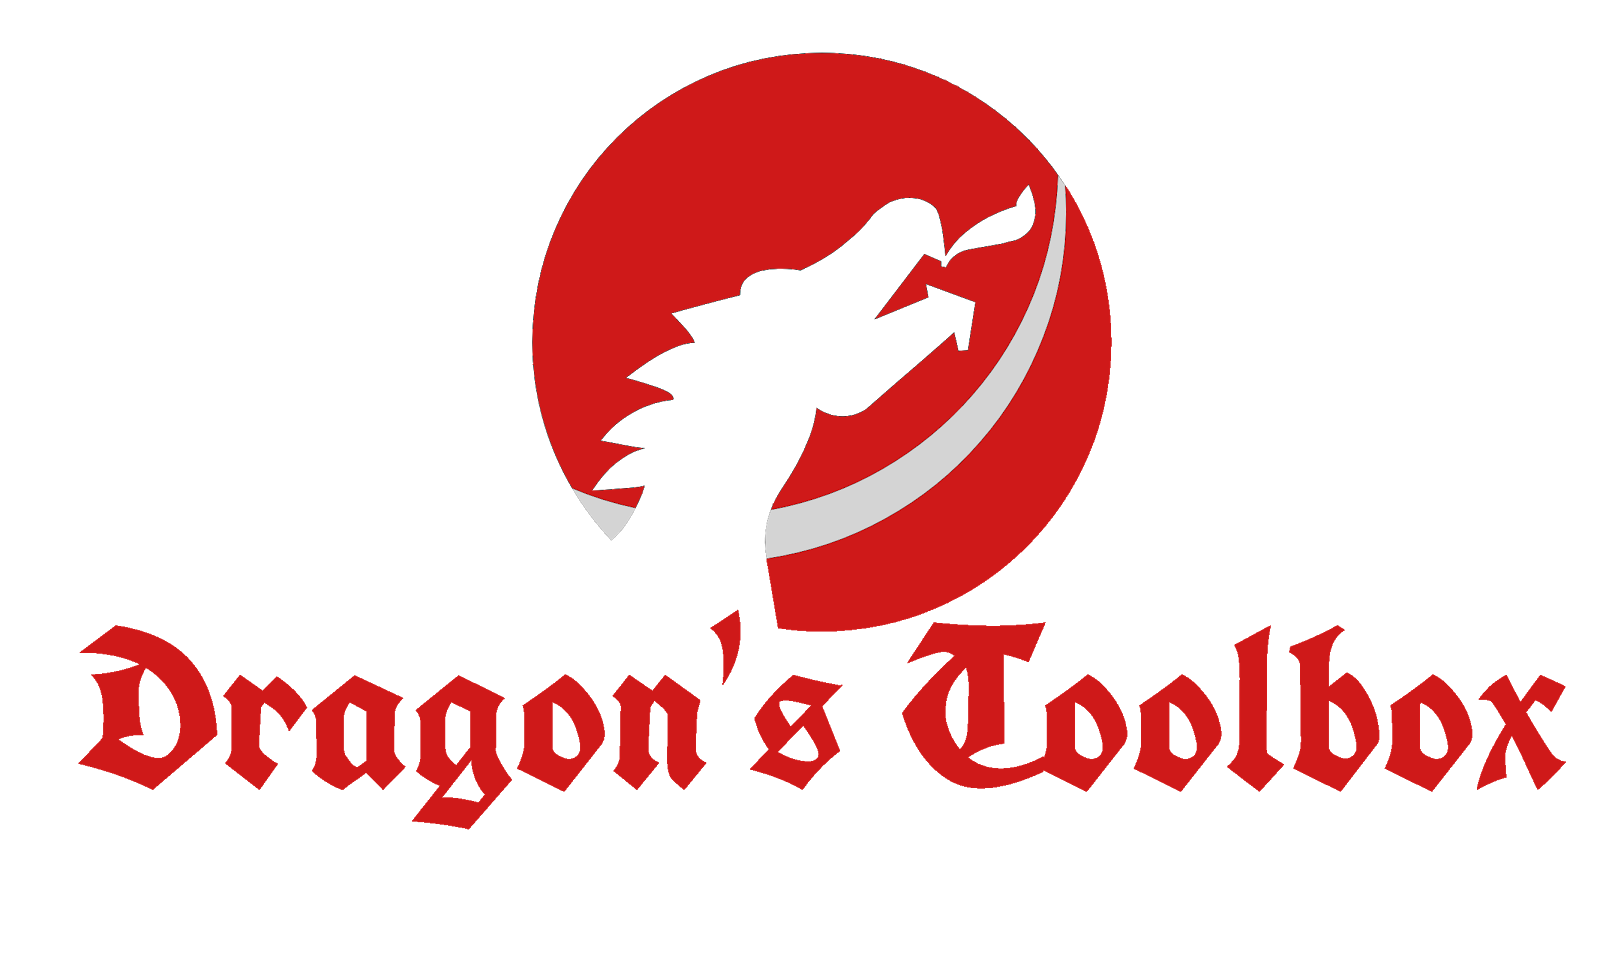 The Dragon's Toolbox